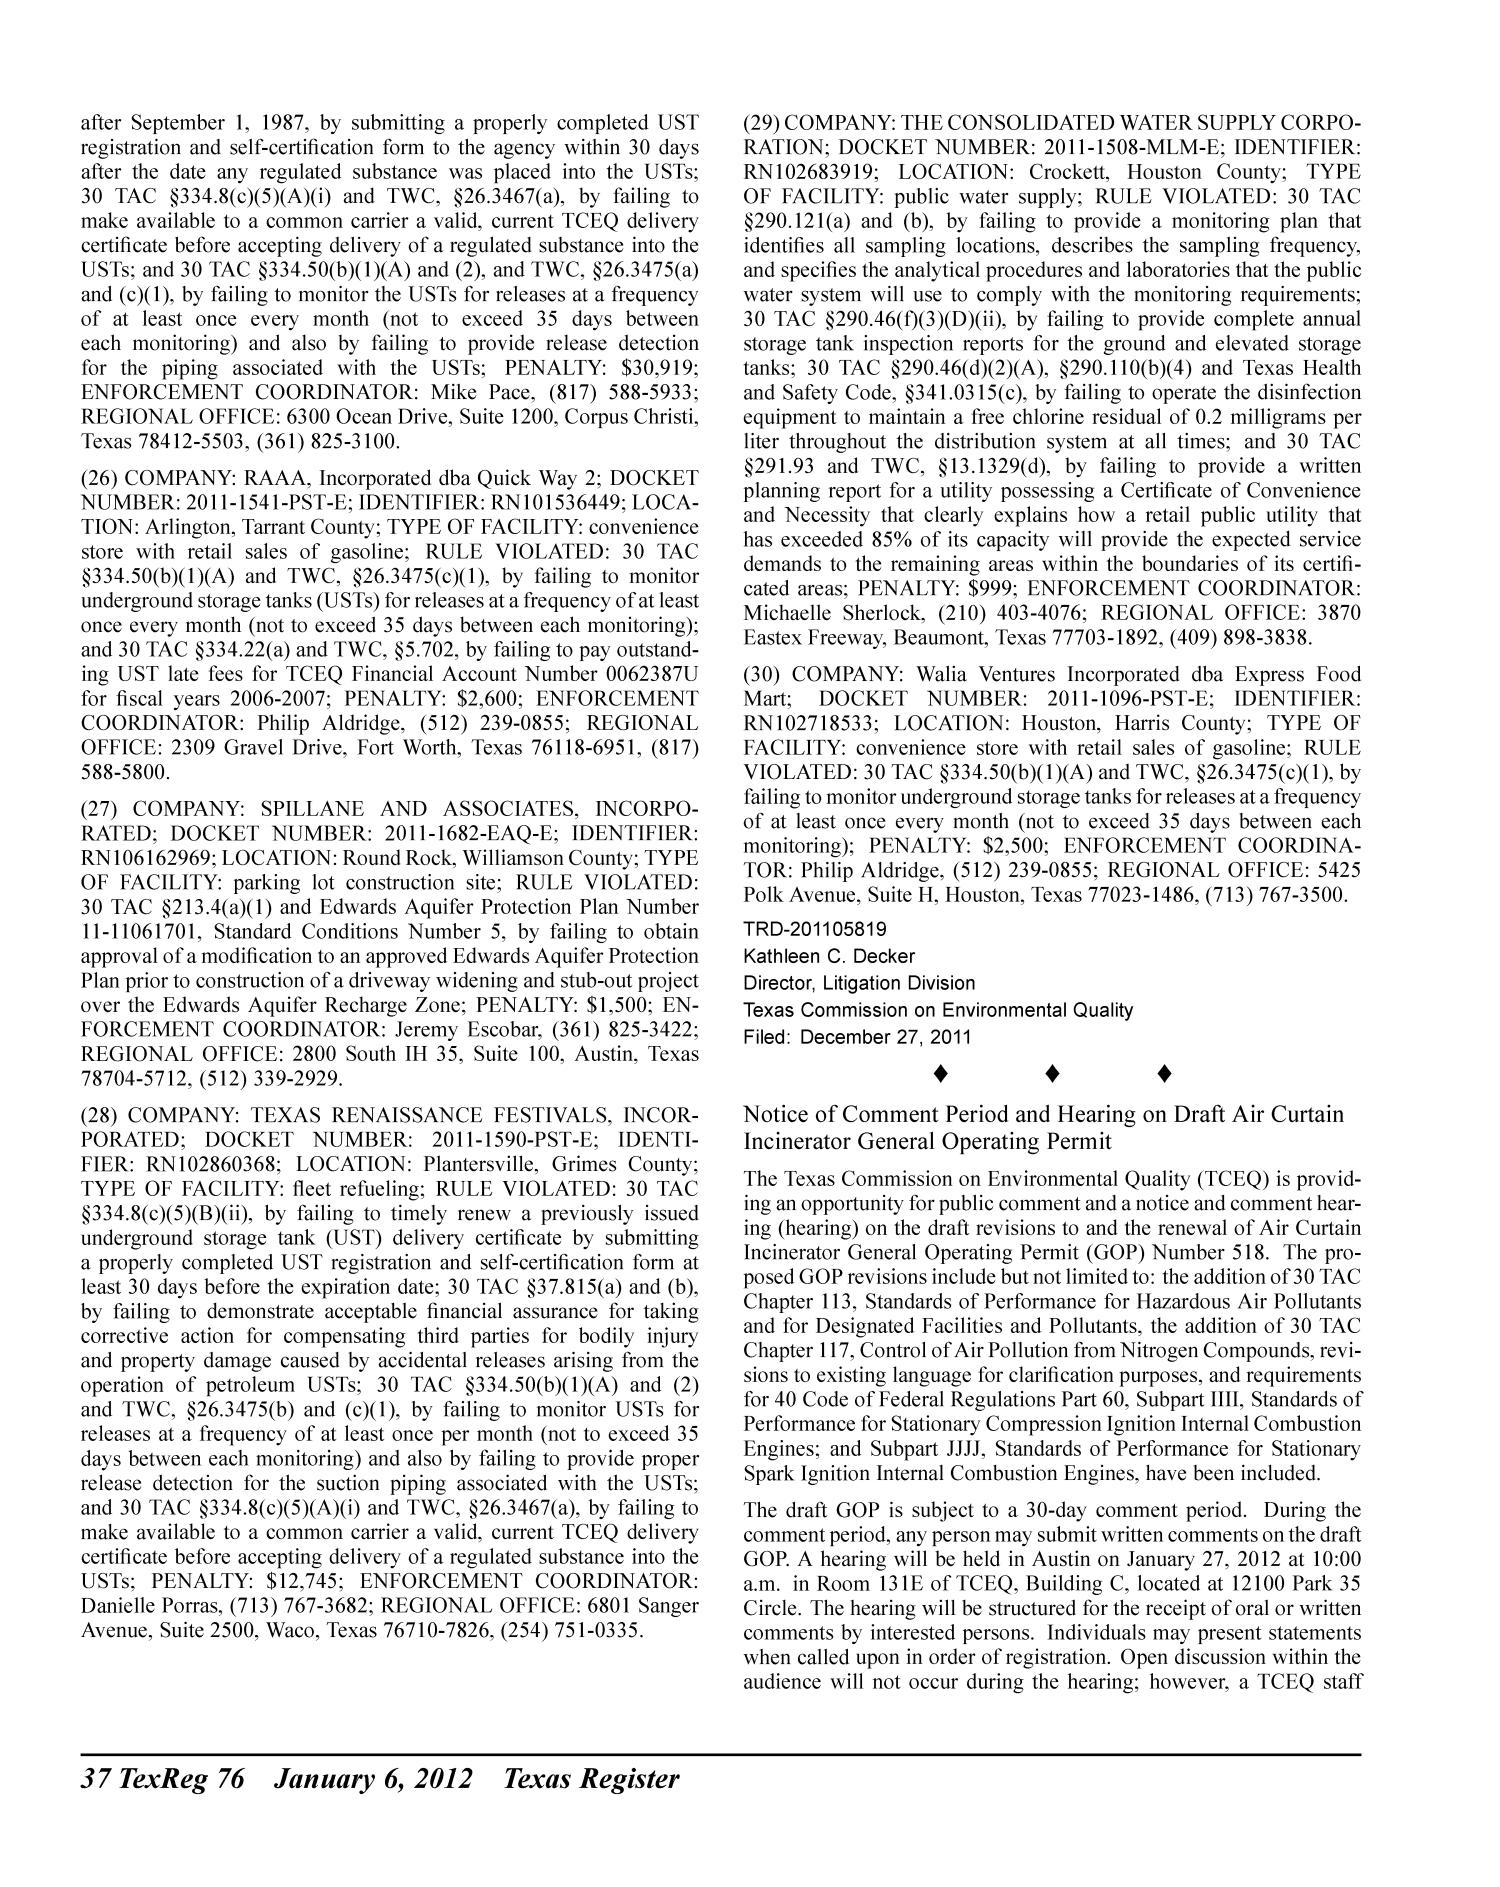 Texas Register, Volume 37, Number 1, Pages 1-84, January 6, 2012
                                                
                                                    76
                                                